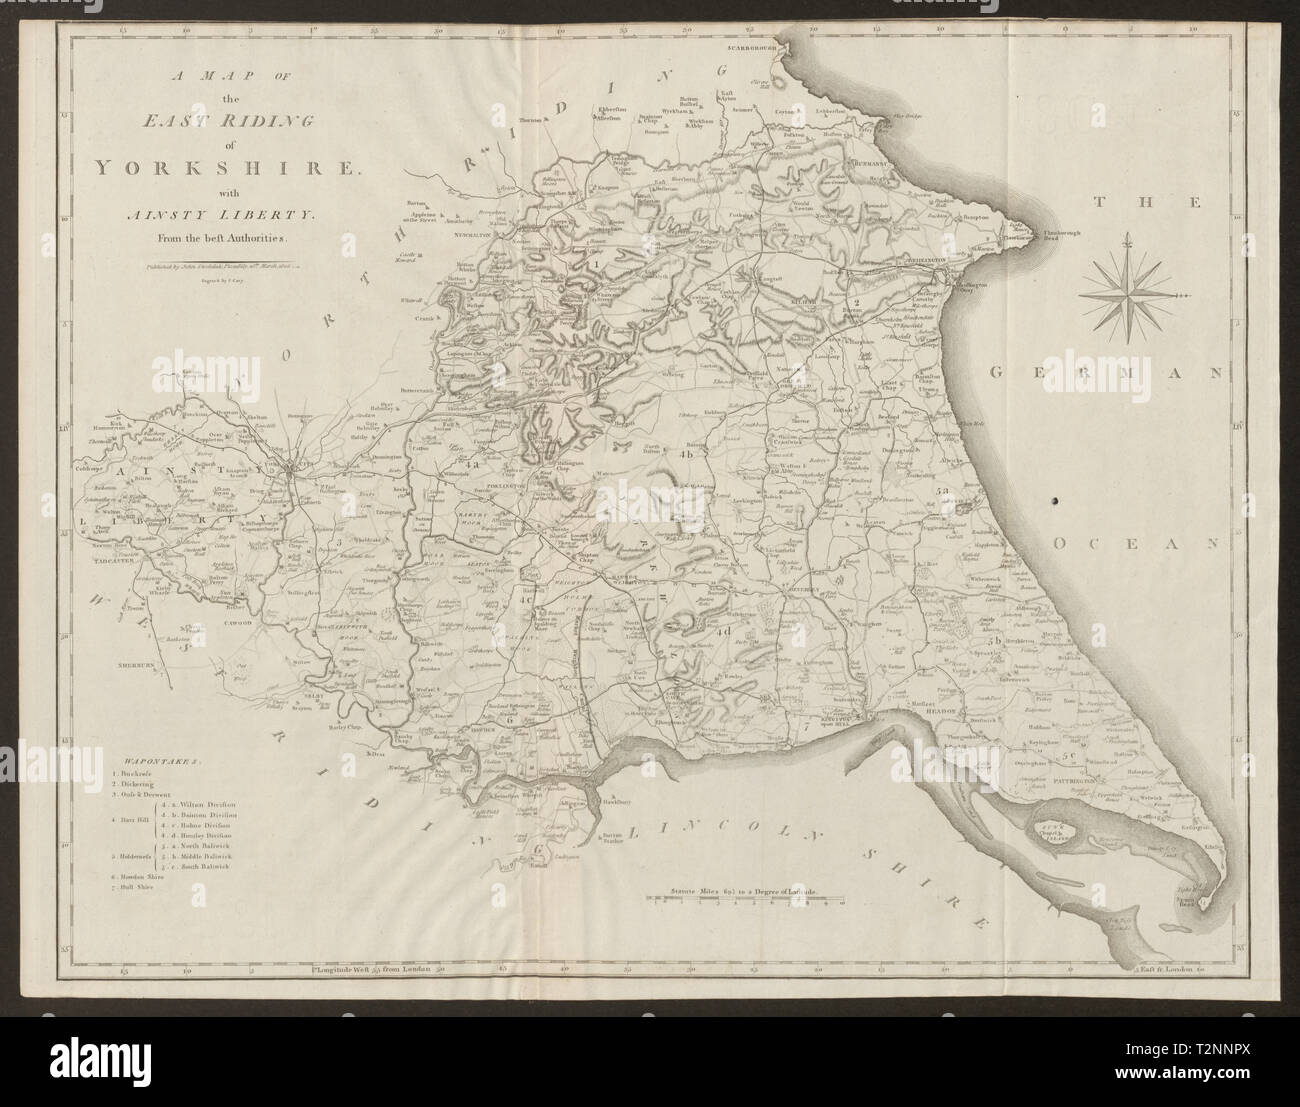 A map of the East Riding of Yorkshire with Ainsty Liberty by John CARY 1805 Stock Photo